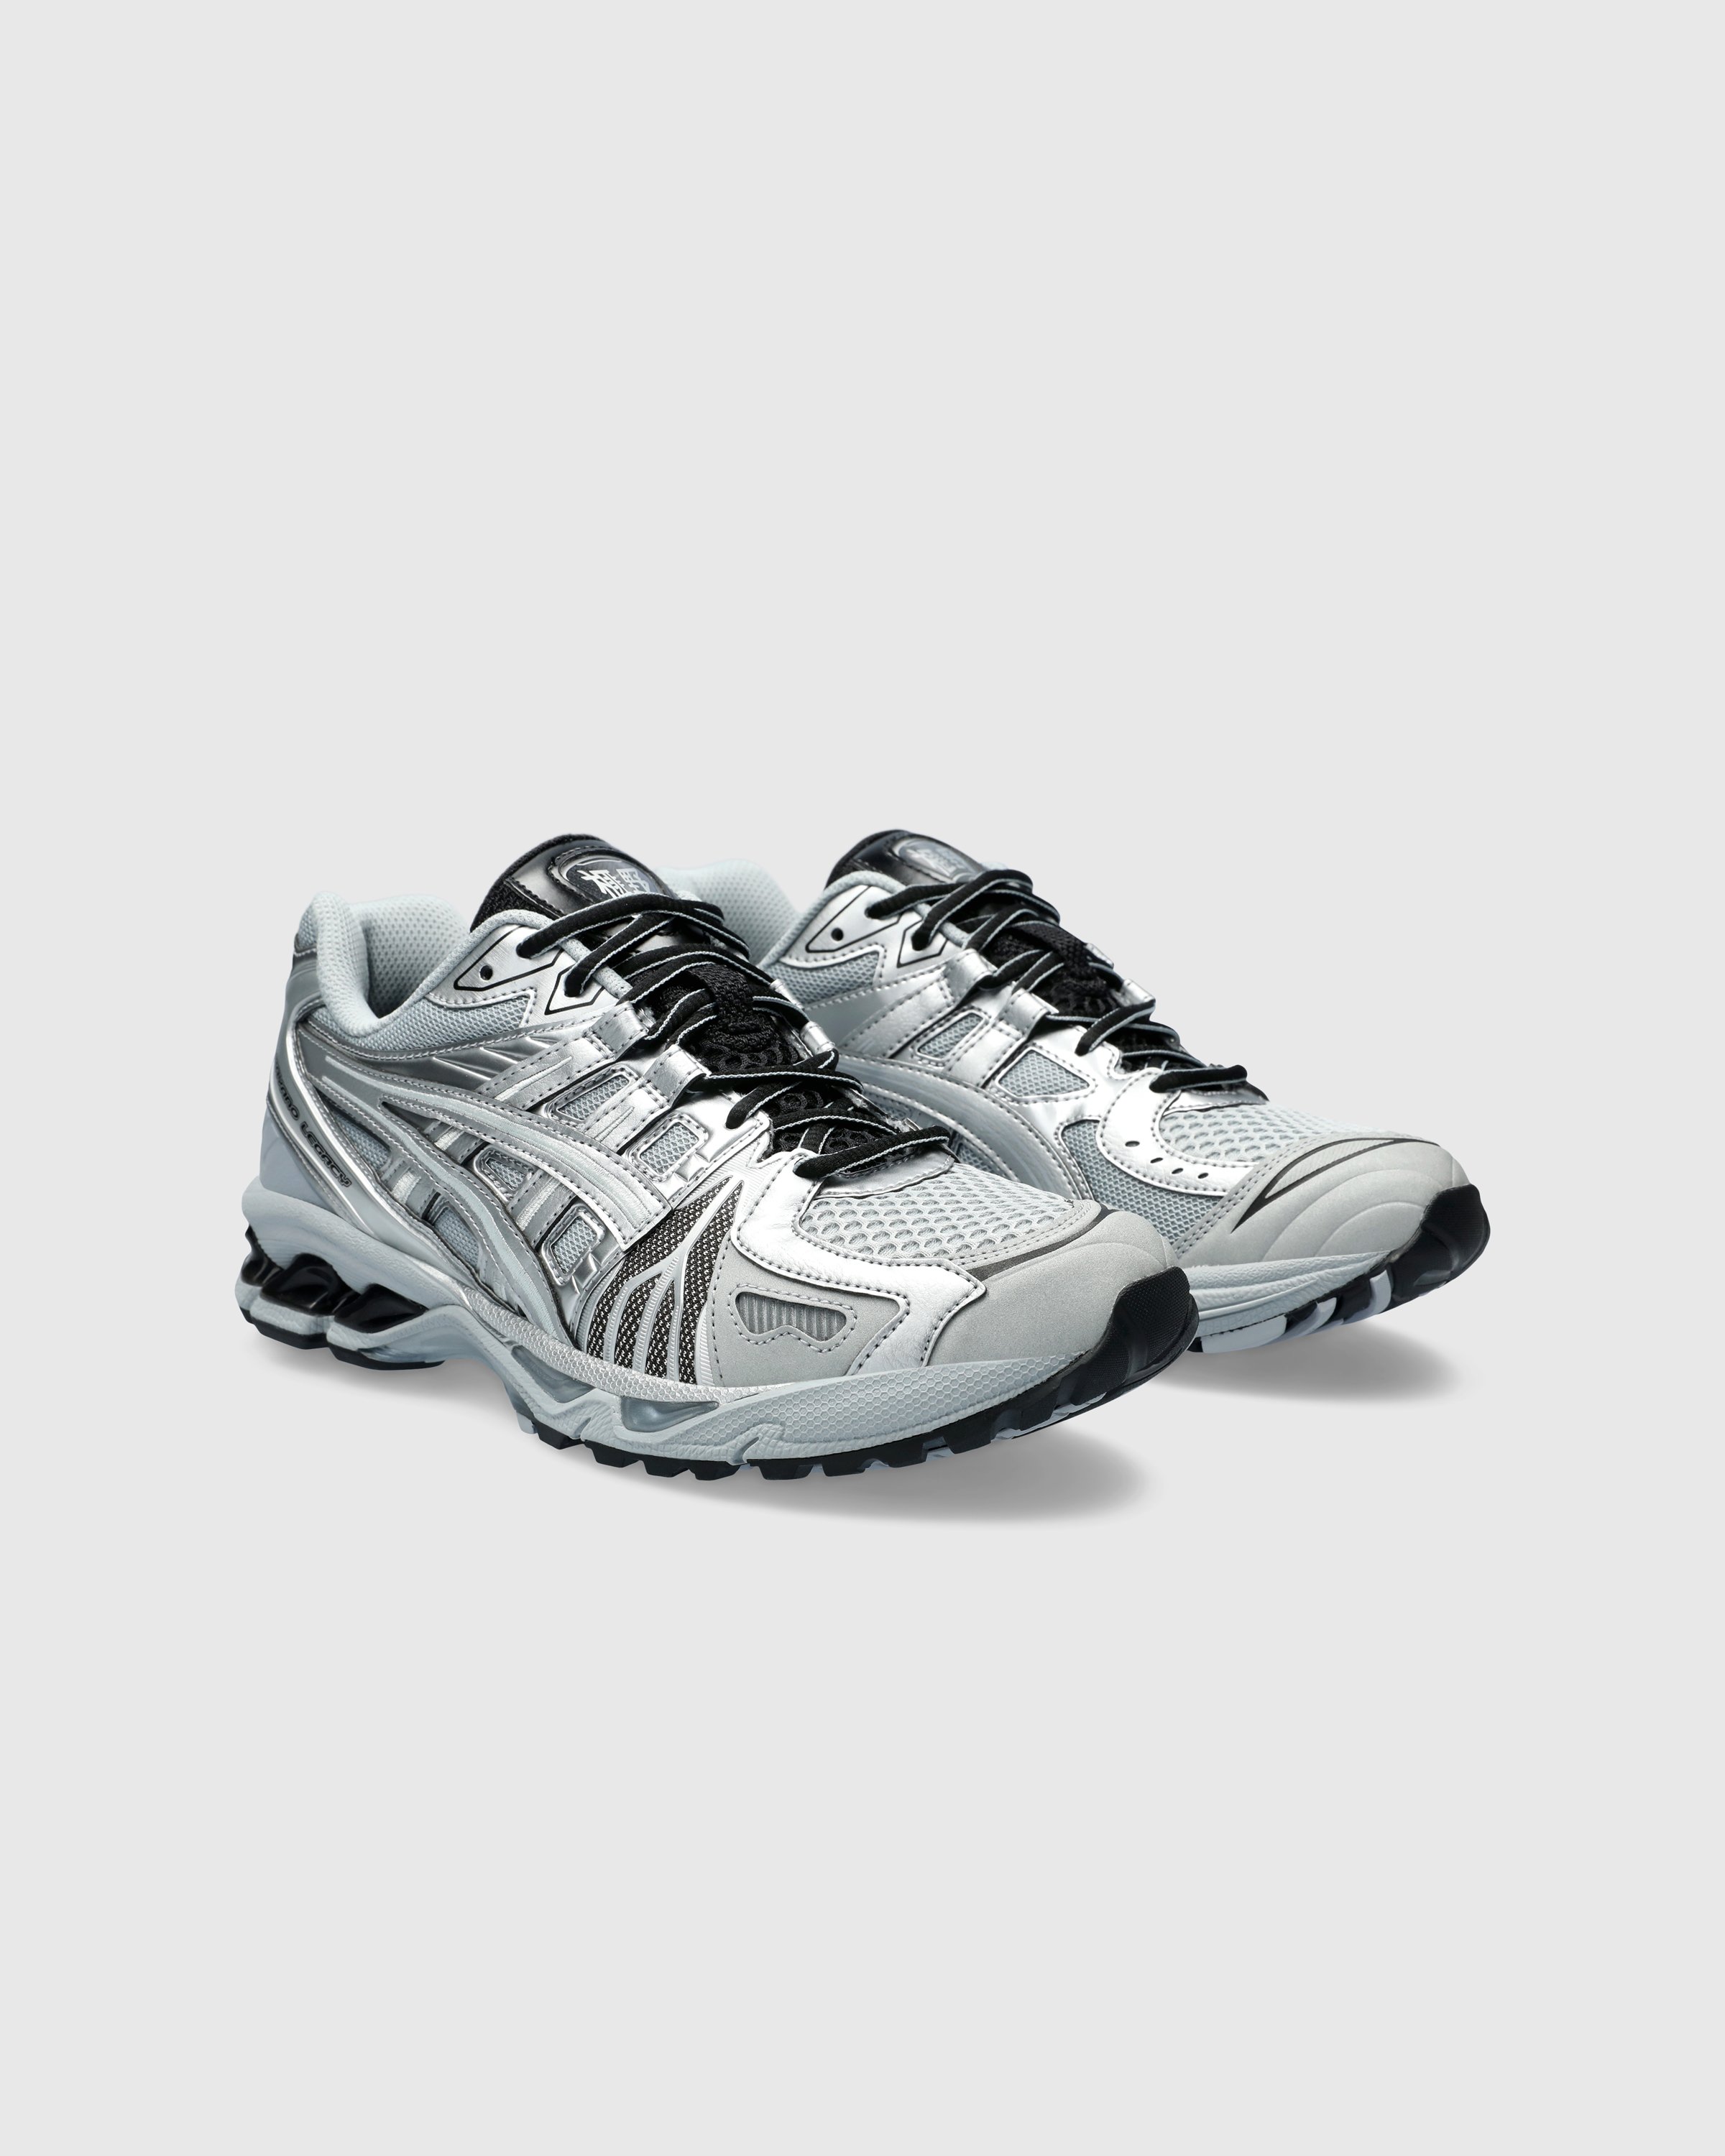 asics - GEL-KAYANO 14 Pure Silver/Pure Silver - Footwear - Silver - Image 3